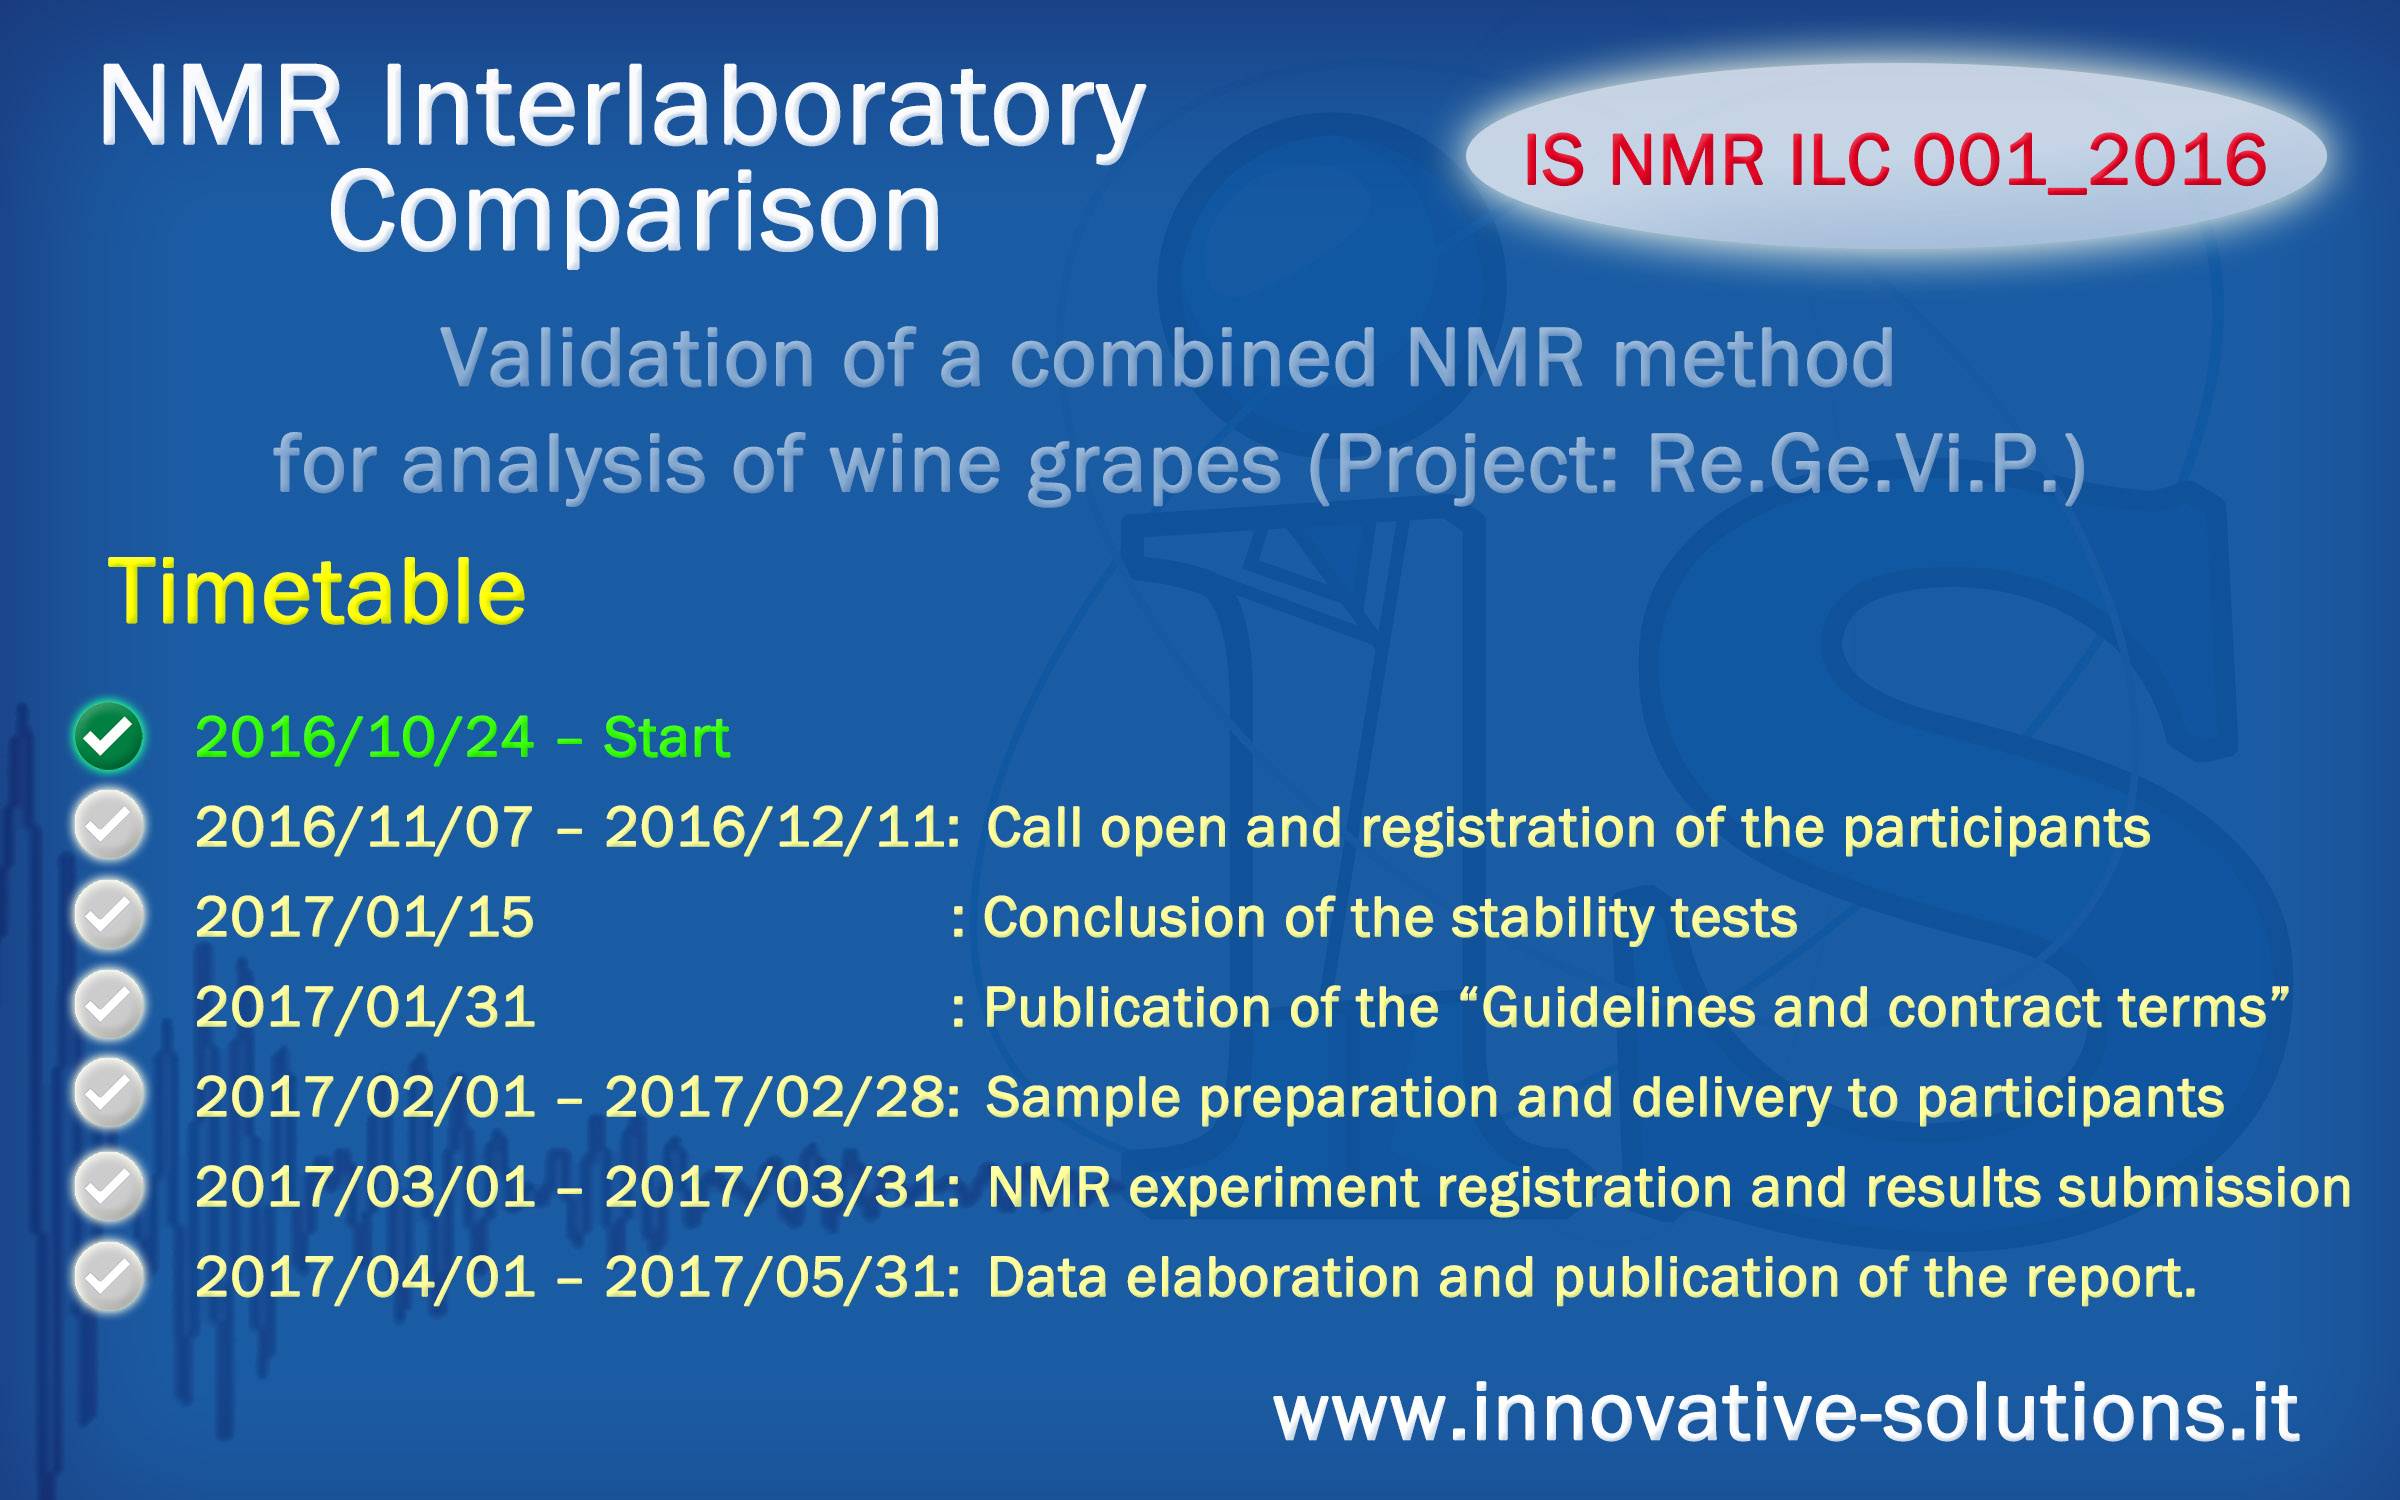 IS NMR ILC 001 2016 Timetable